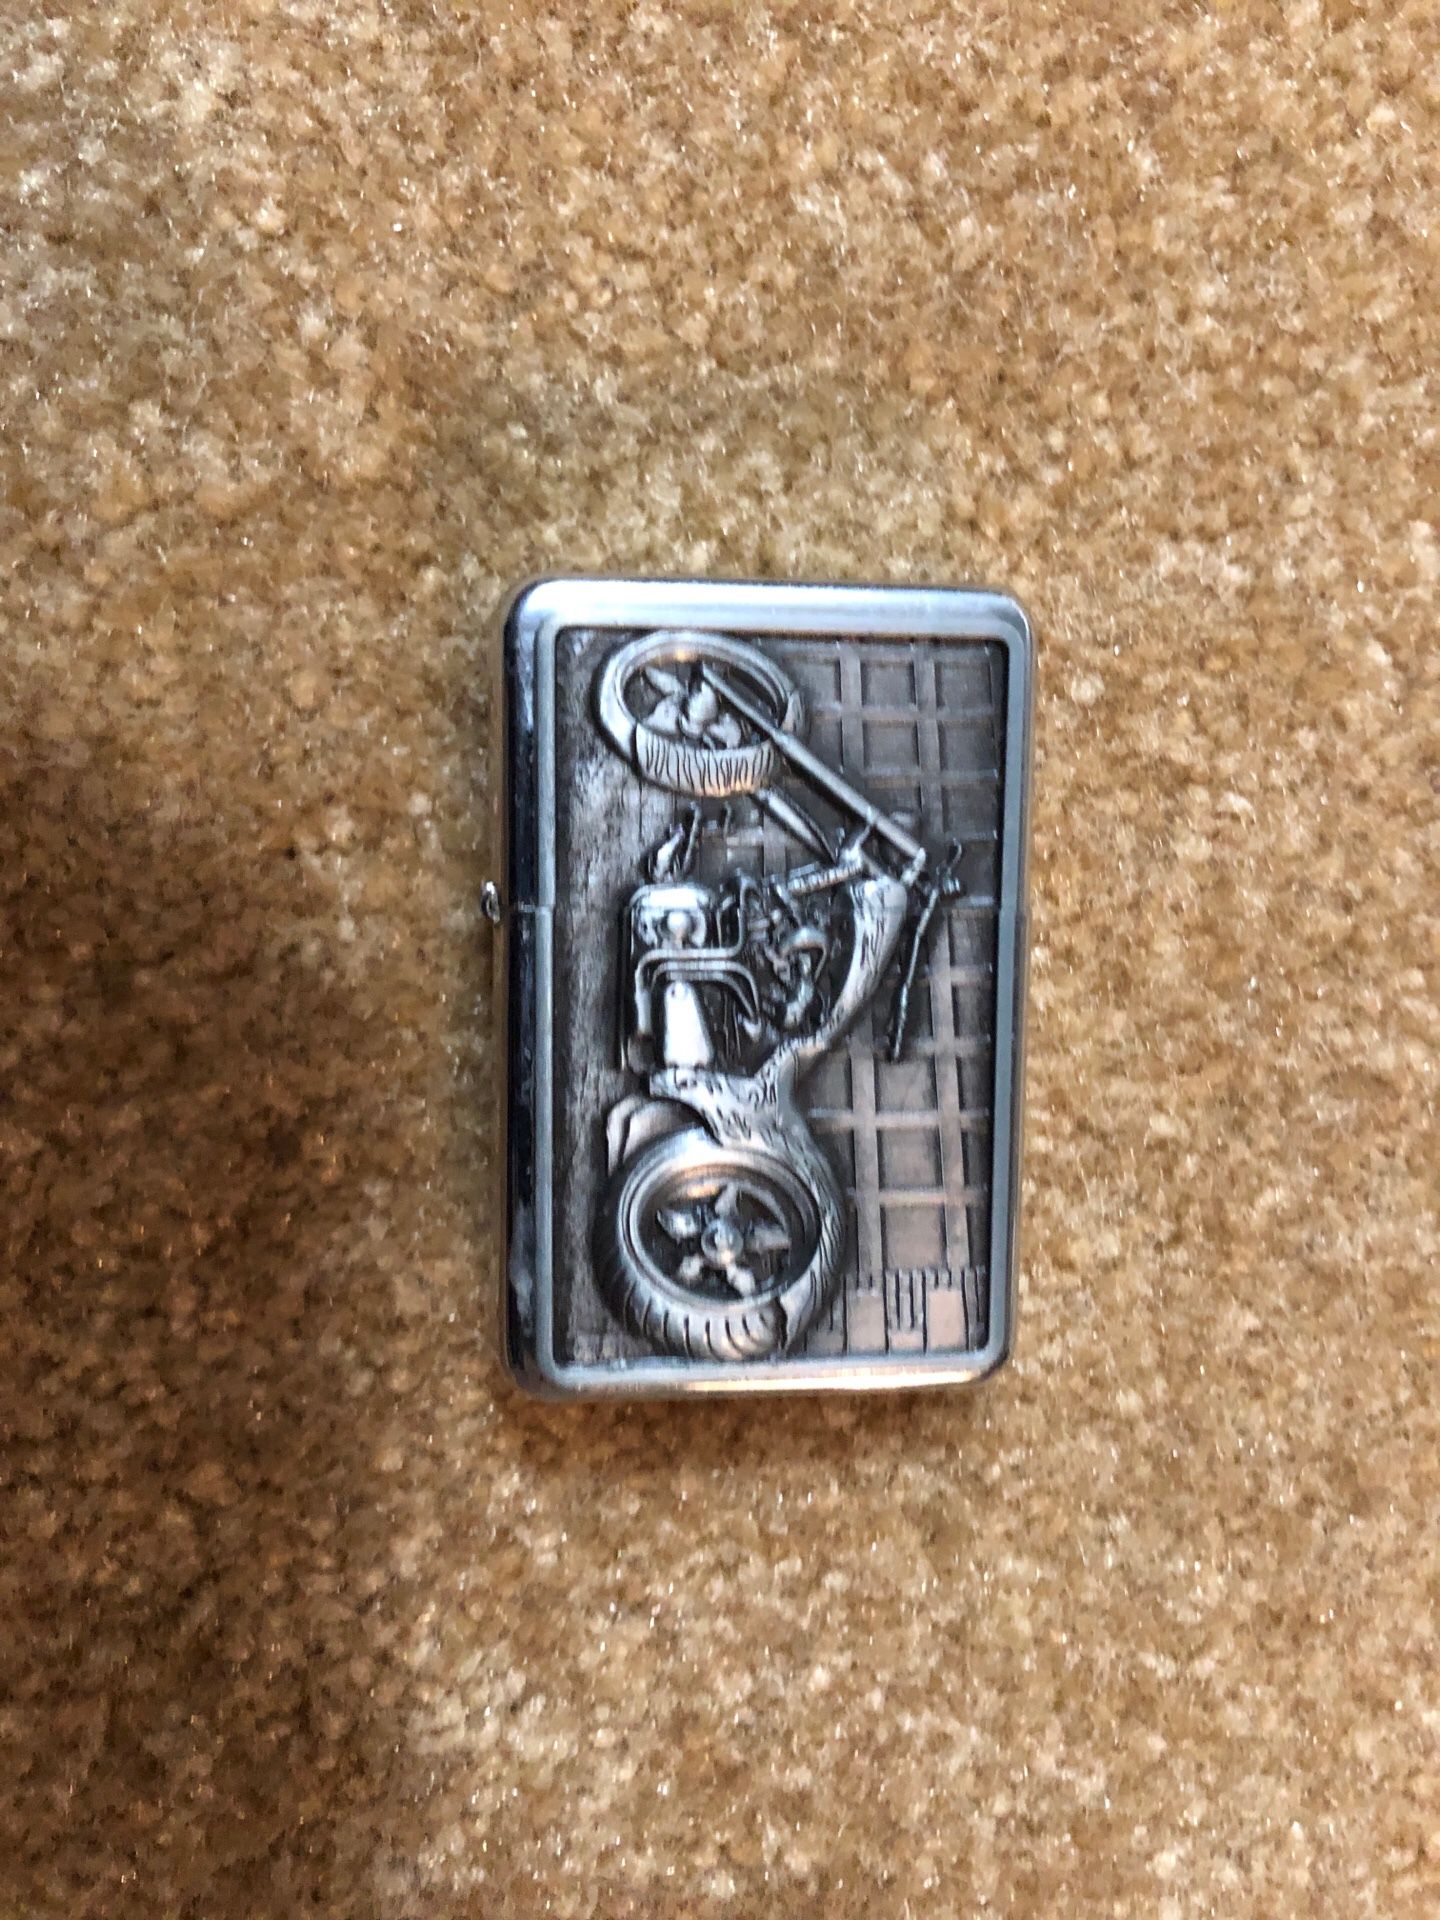 ZIPPO motorcycle lighter. COOL!